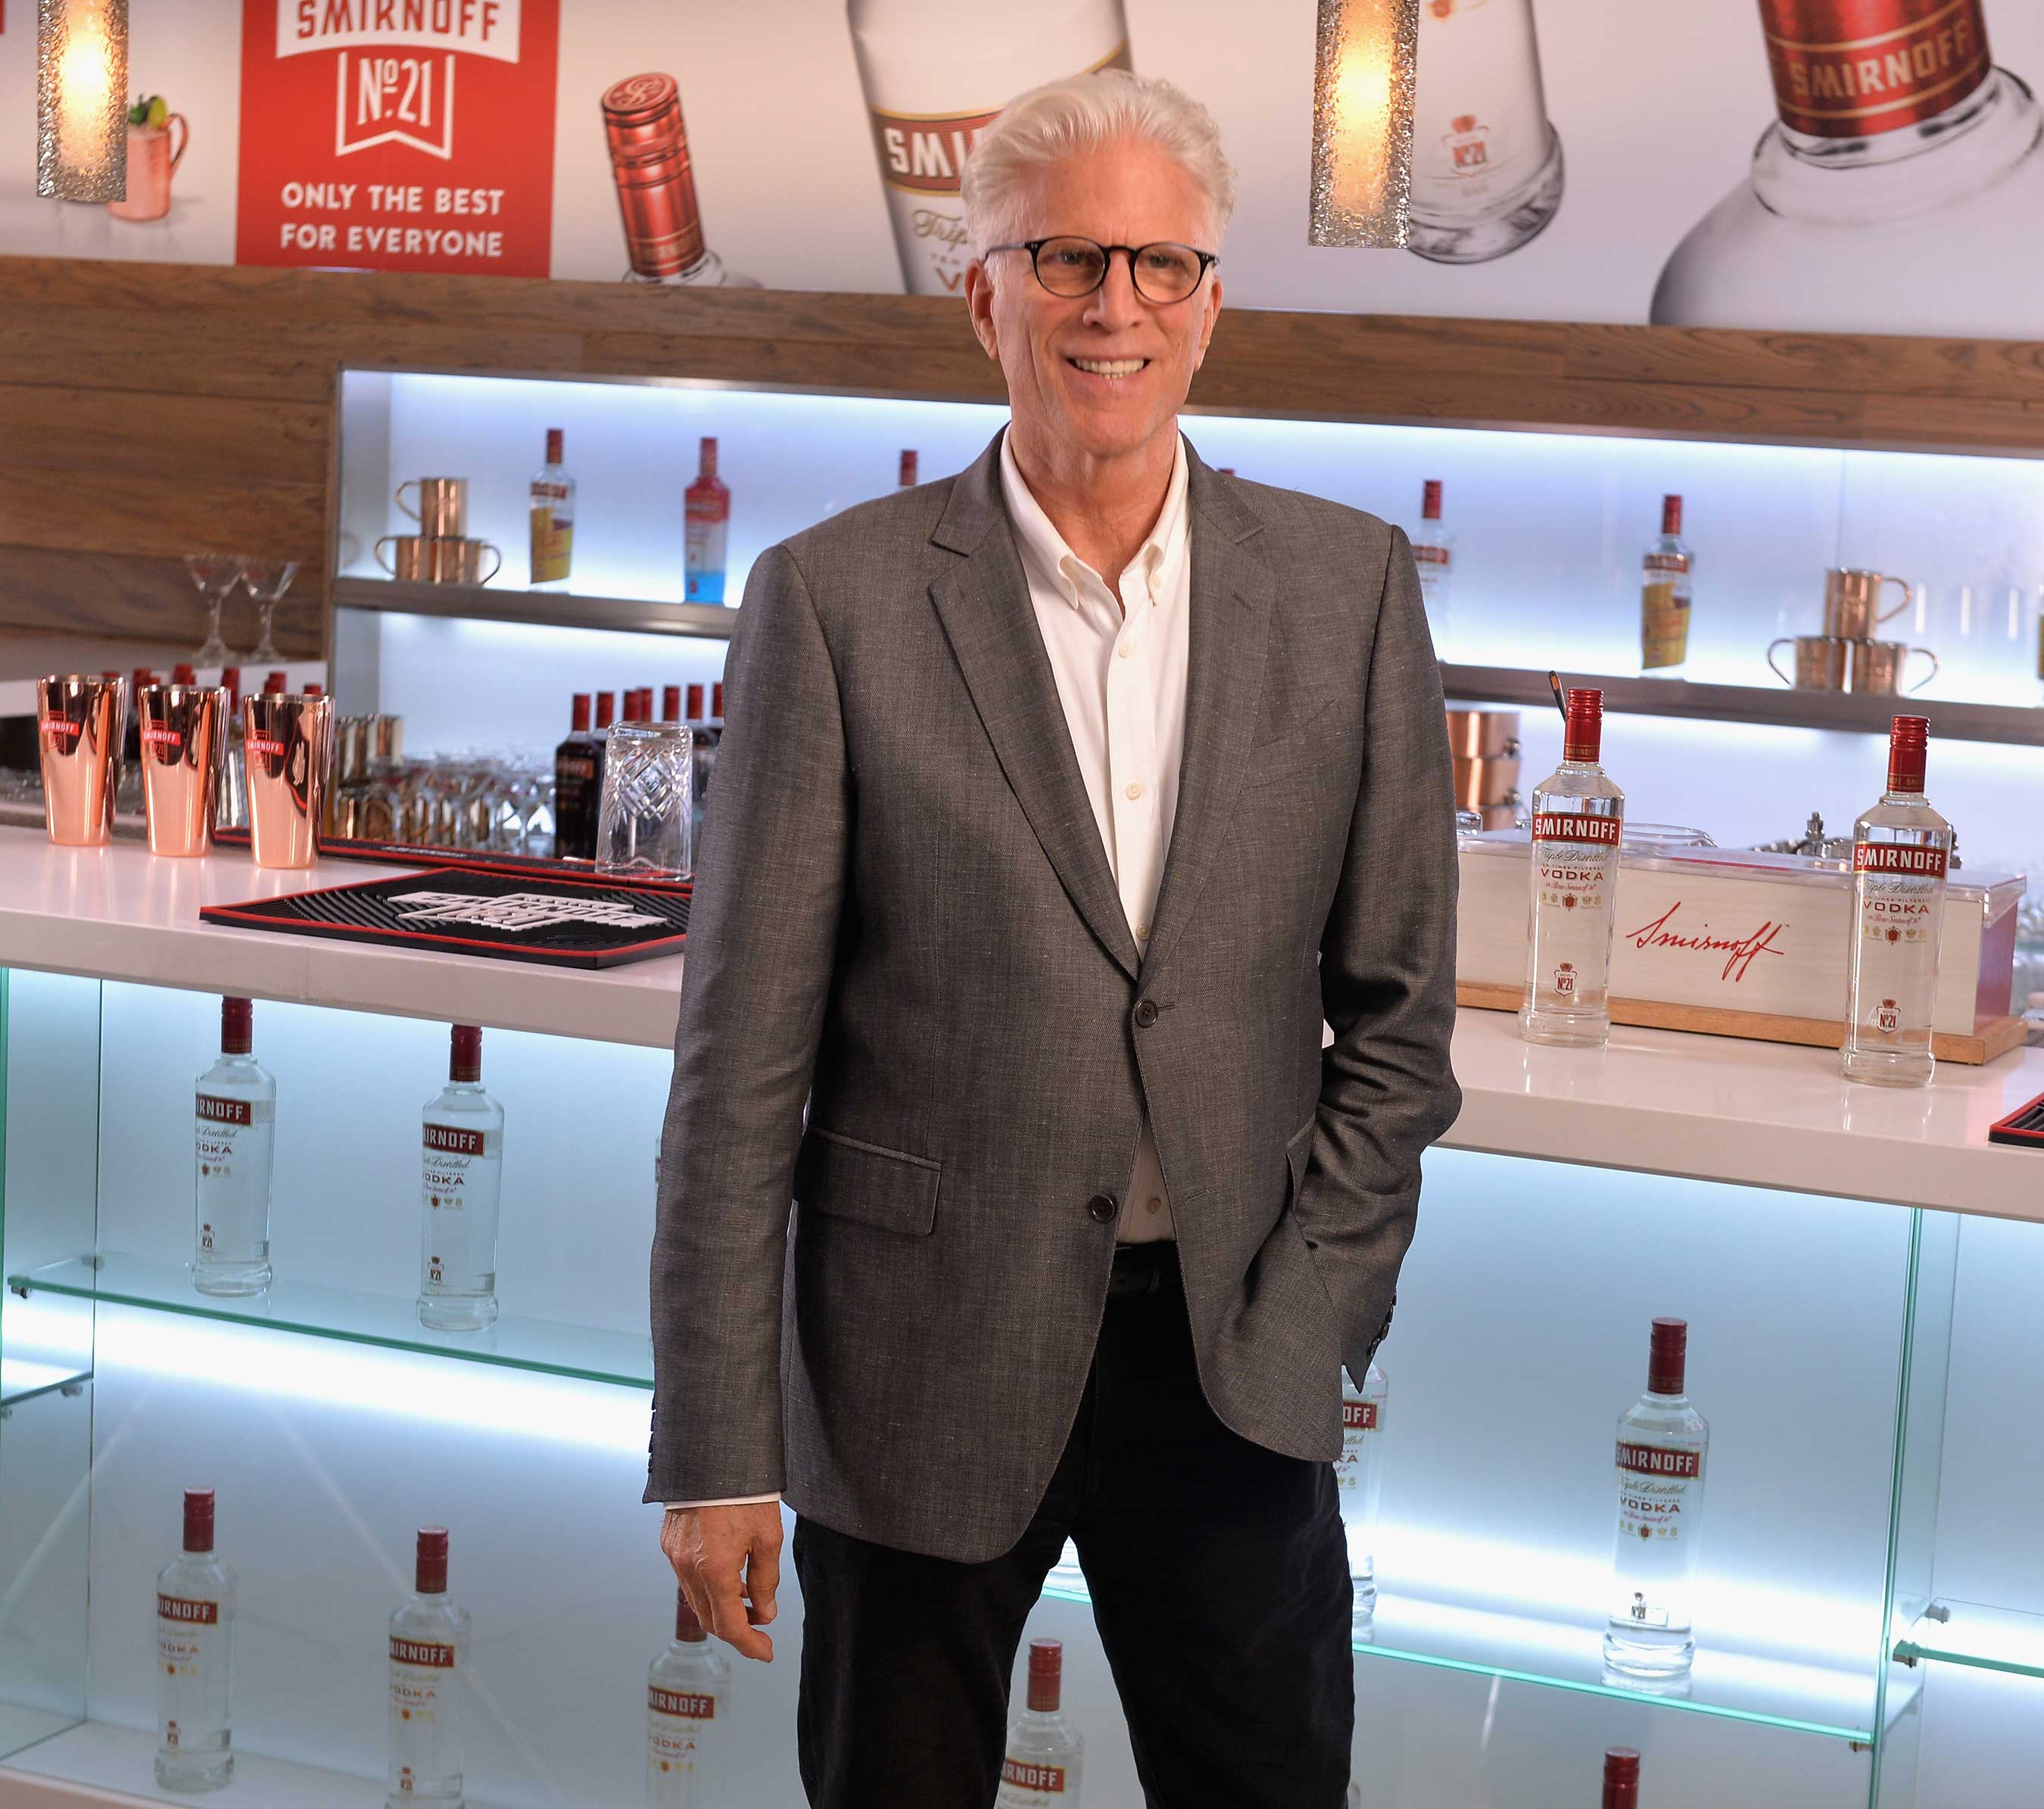 Ted Danson Heads To The Diageo Facility in Plainfield, Illinois To Meet the Hard-working People Behind SMIRNOFF, America’s Most-awarded Vodka, on October 4, 2017